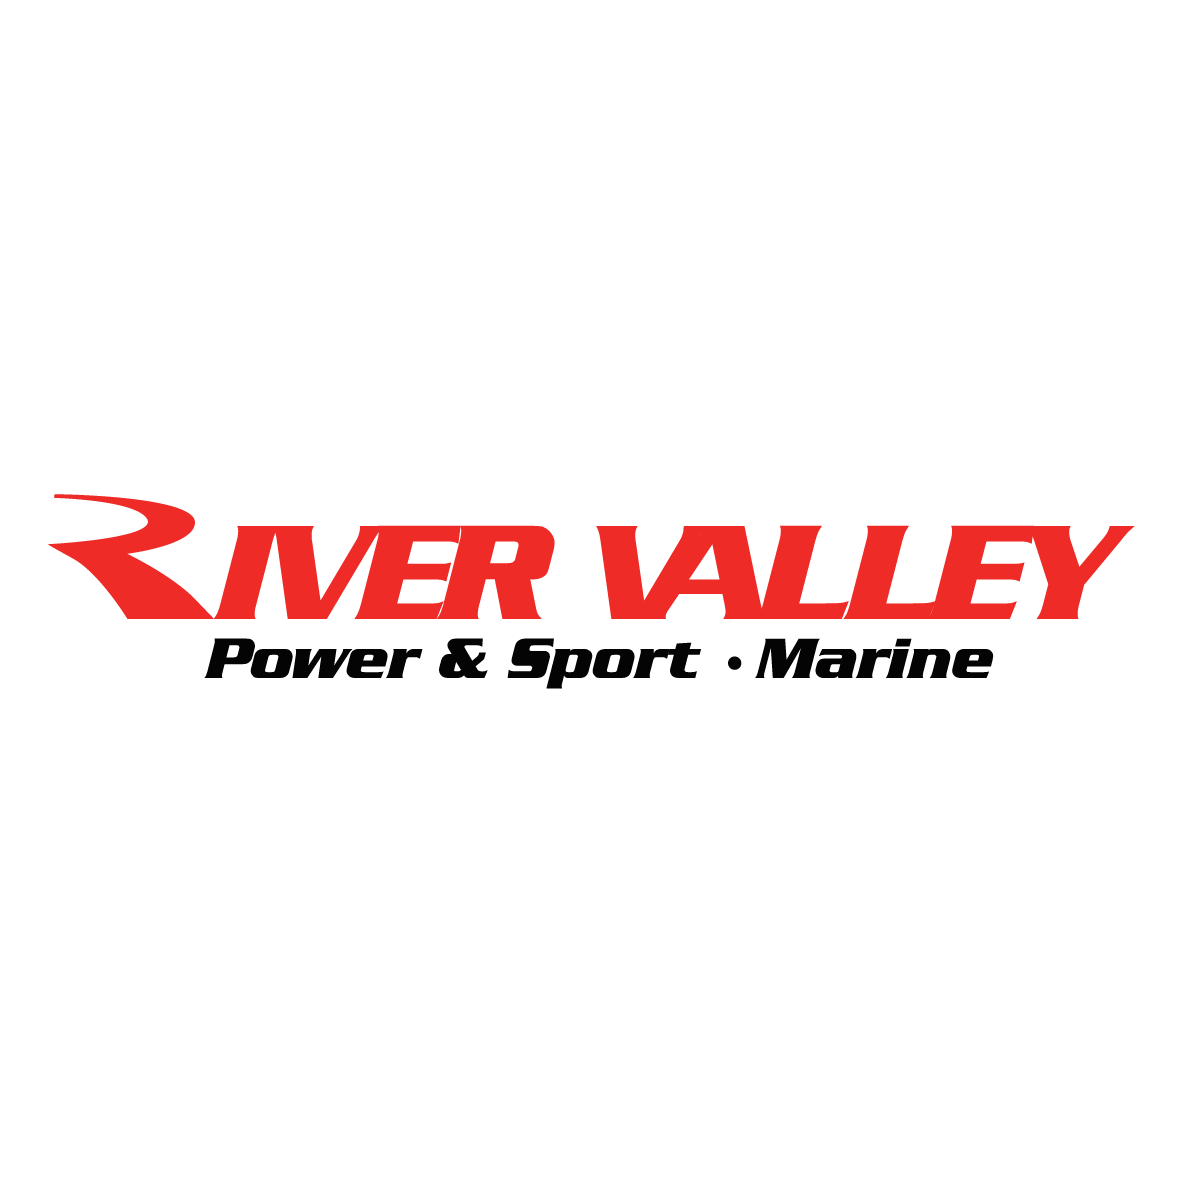 River Valley Power and Sport